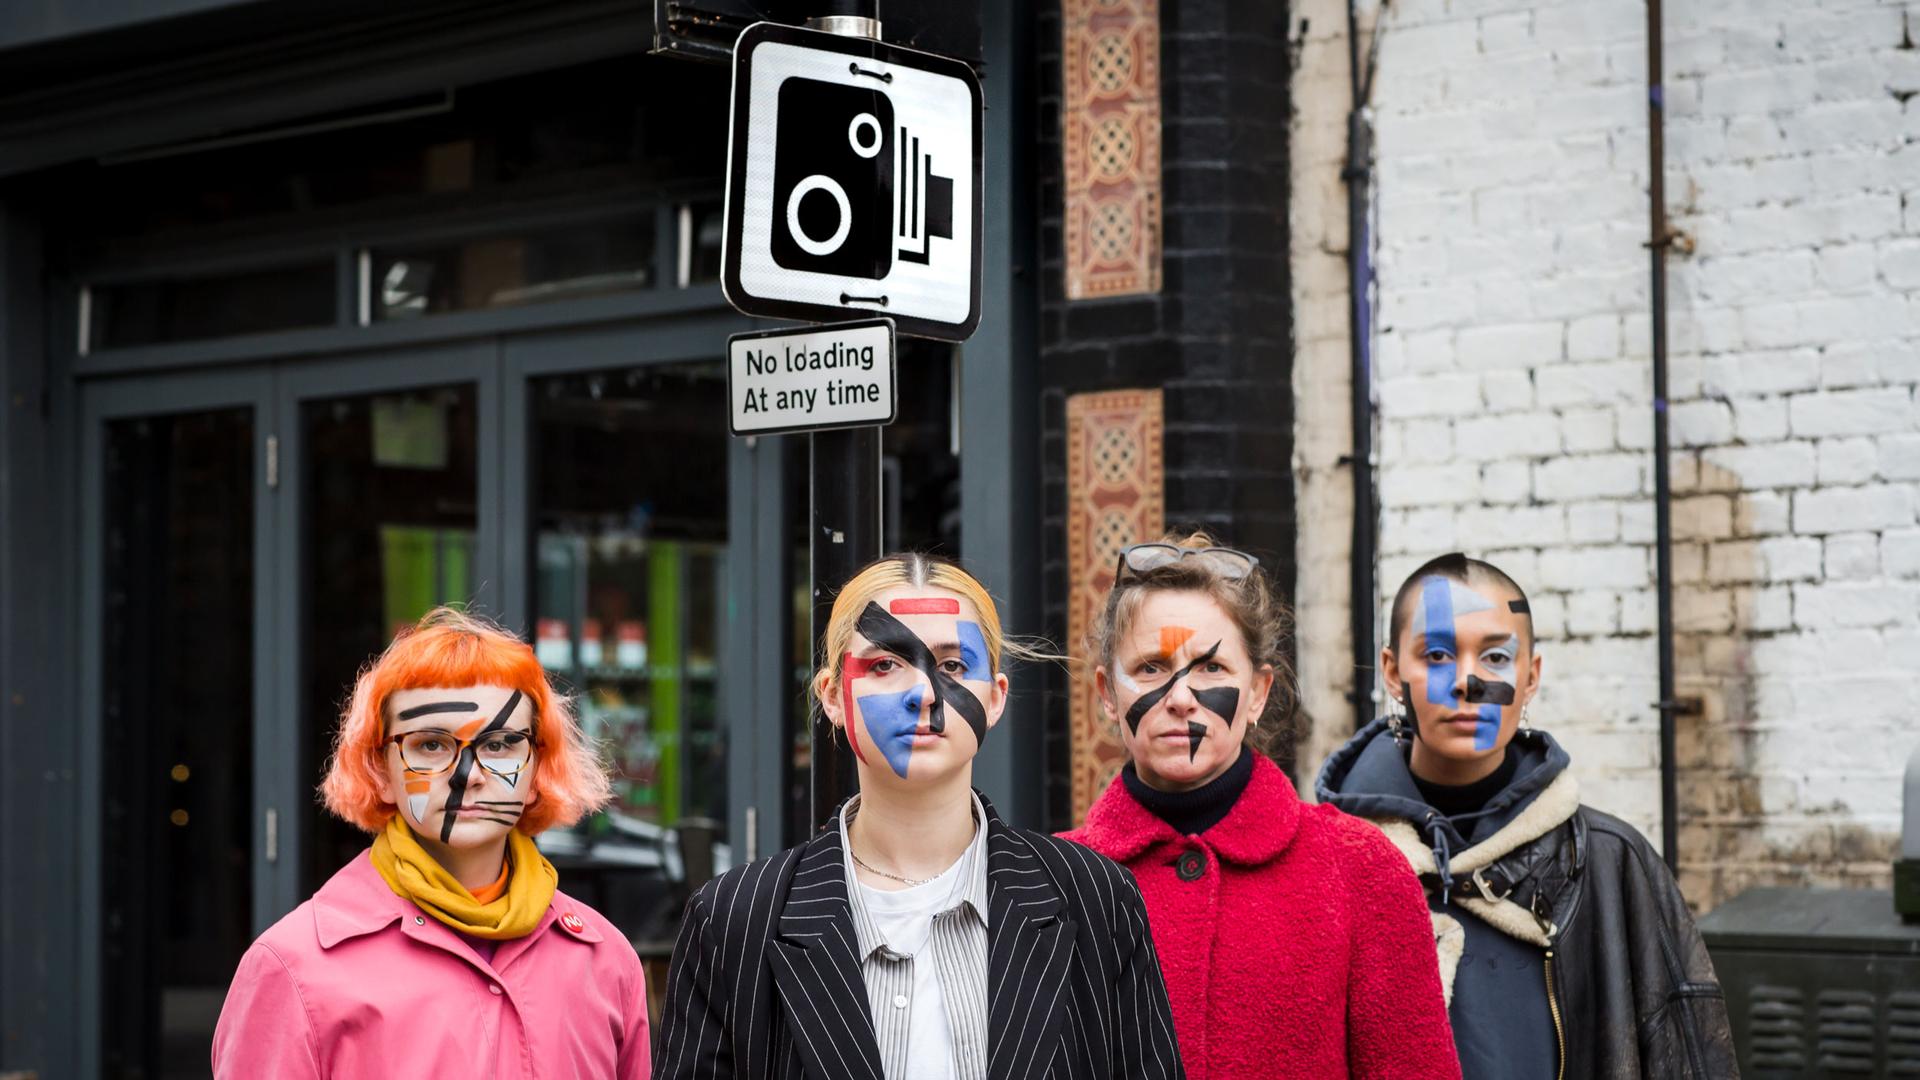 Four people with painted faces stand in front of a street sign with a camera on it.